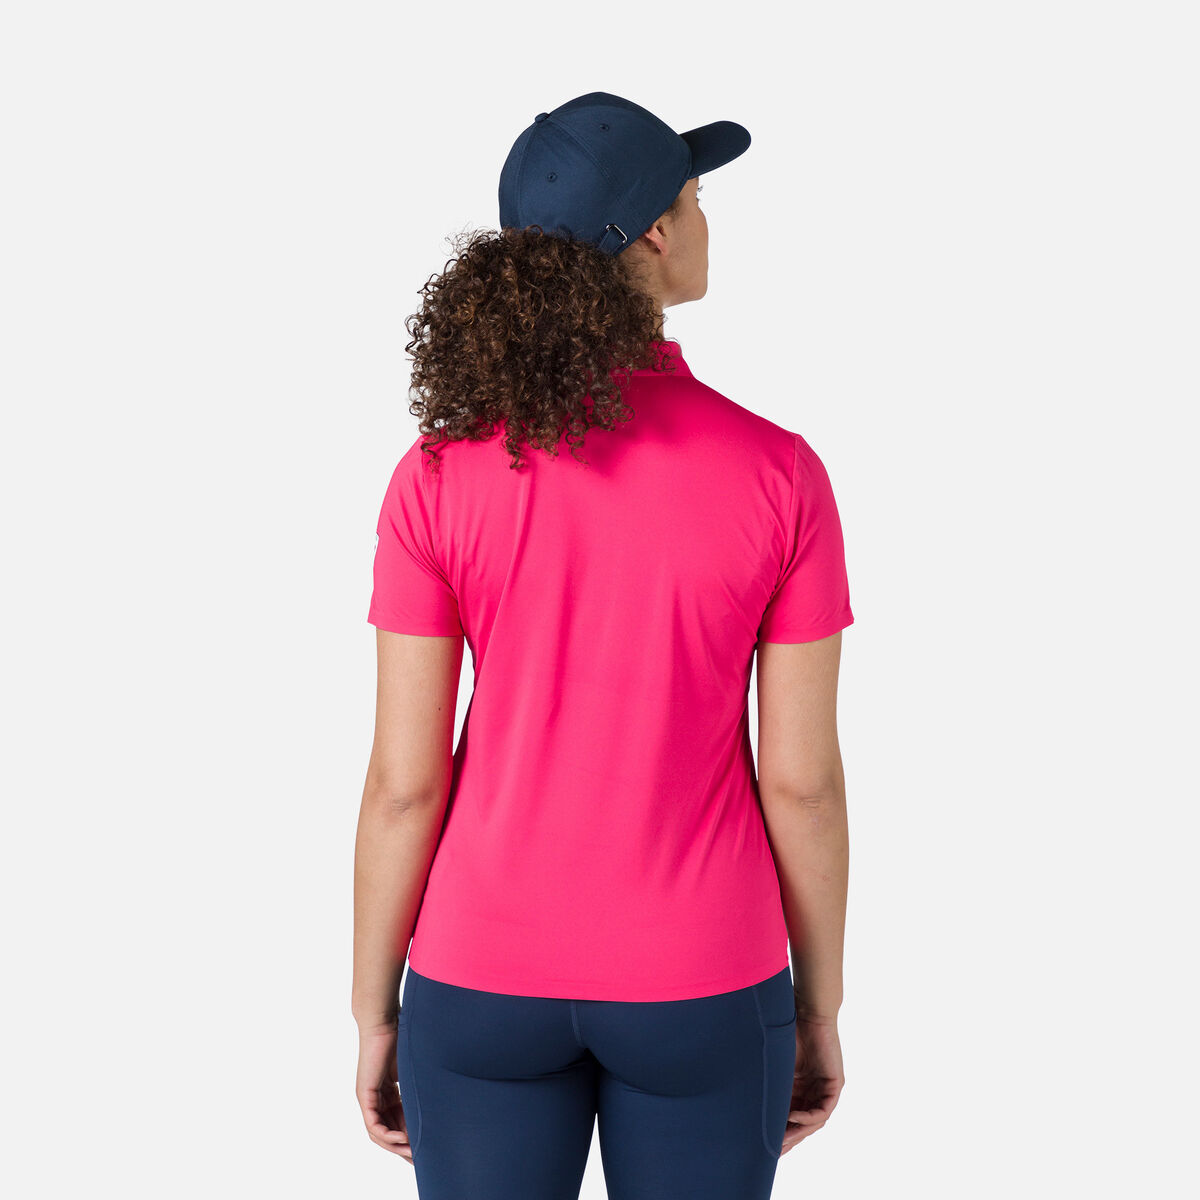 Women's lightweight breathable polo shirt